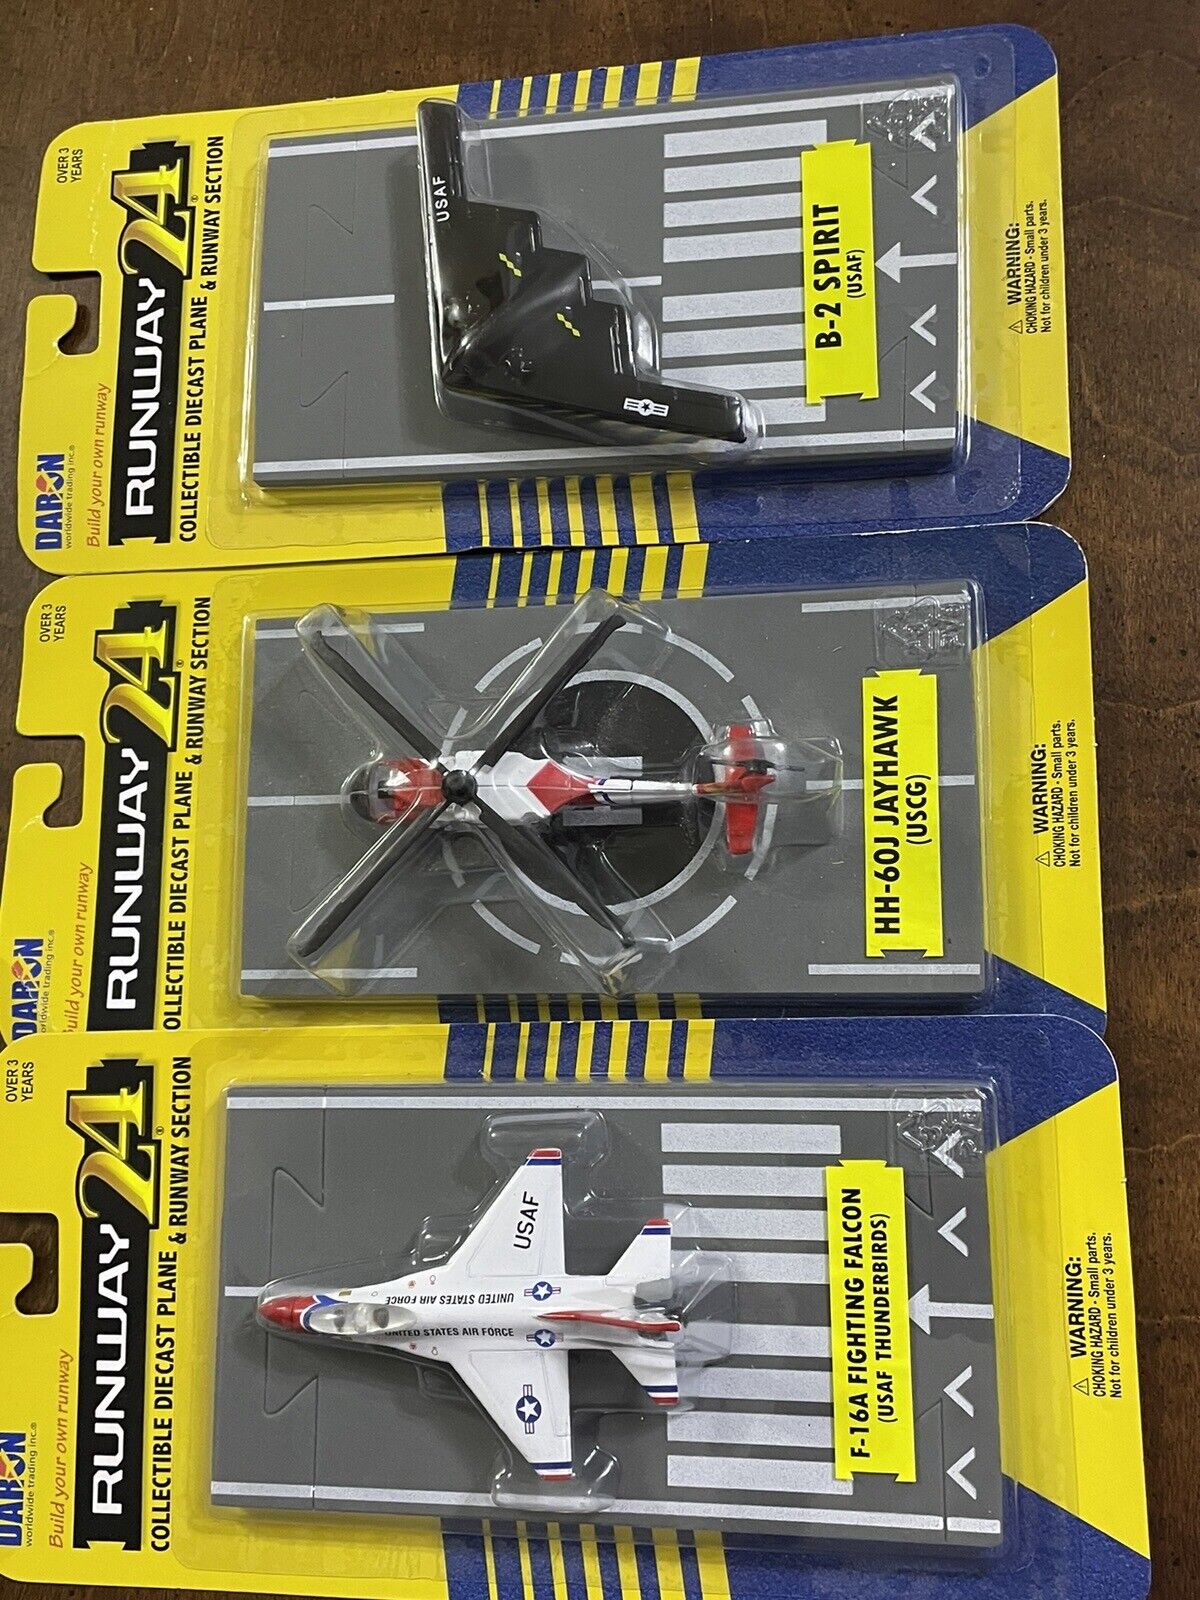 Runway 24 Collectible Die Cast Plane Toys Sell As A Set Of Three